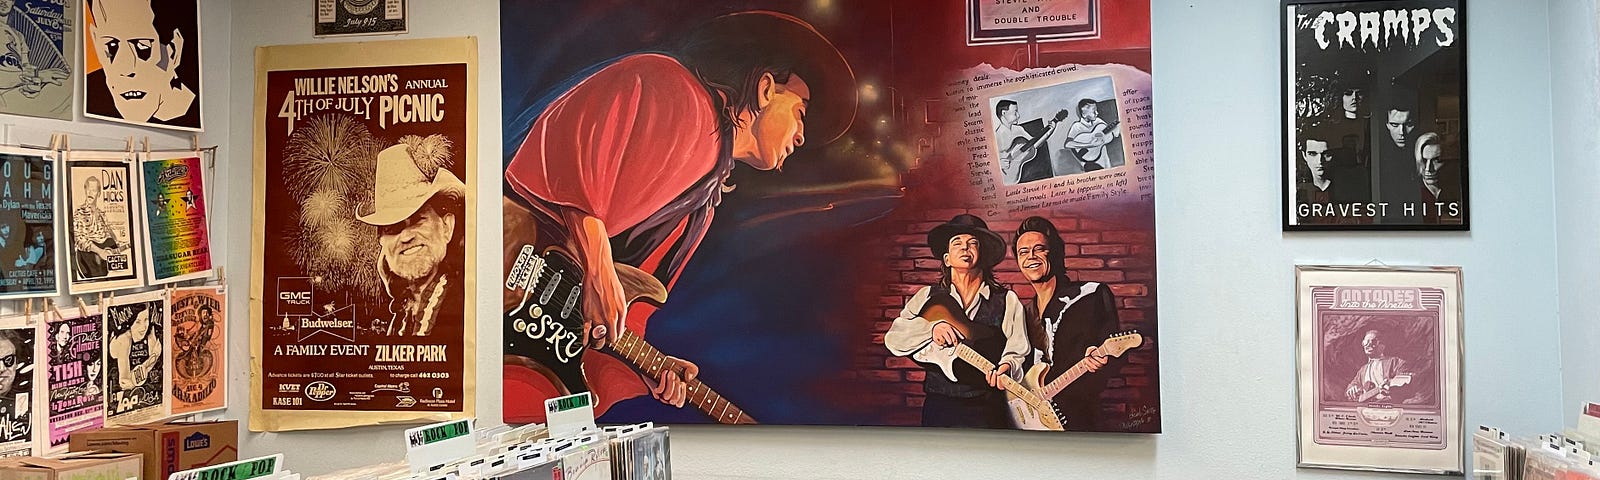 A record store with a painting of Stevie Ray Vaughan on the wall with a promo for Antone’s nightclub. There are many vinyl records in racks in front of the painting and posters for gigs on the walls.